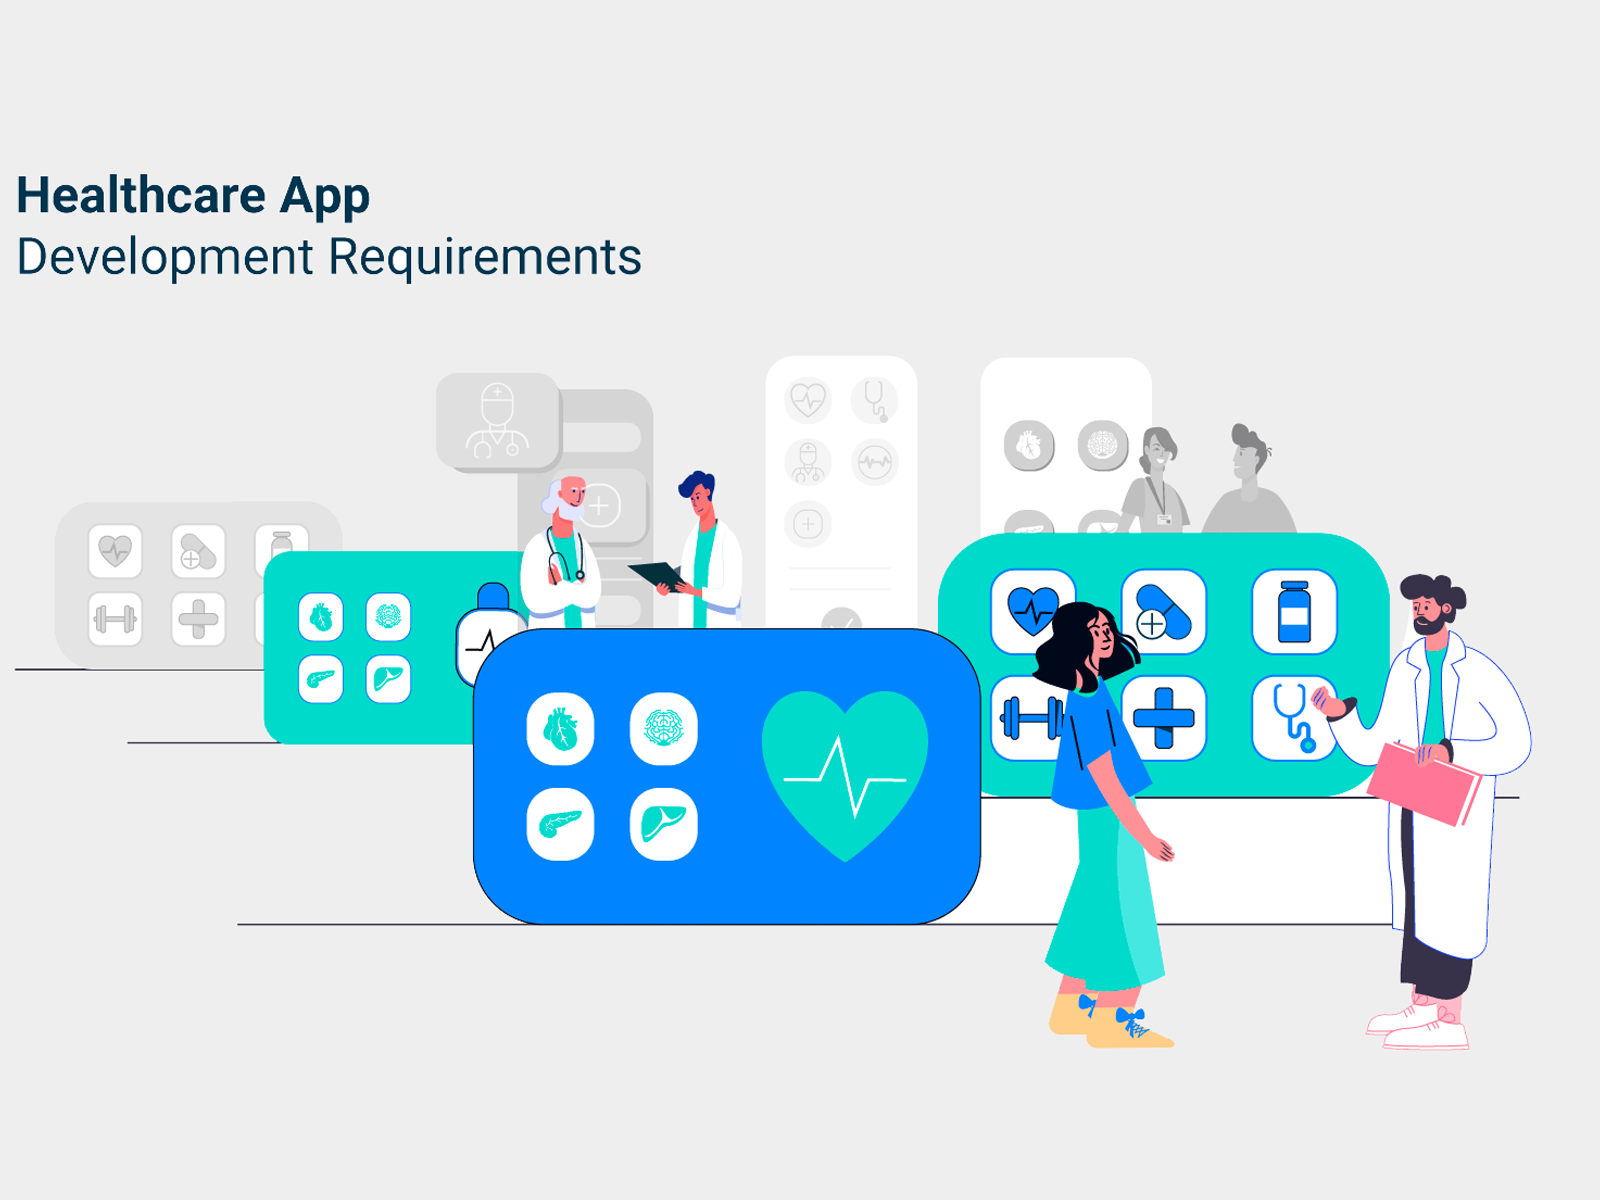 What are the Healthcare App Development Requirements?